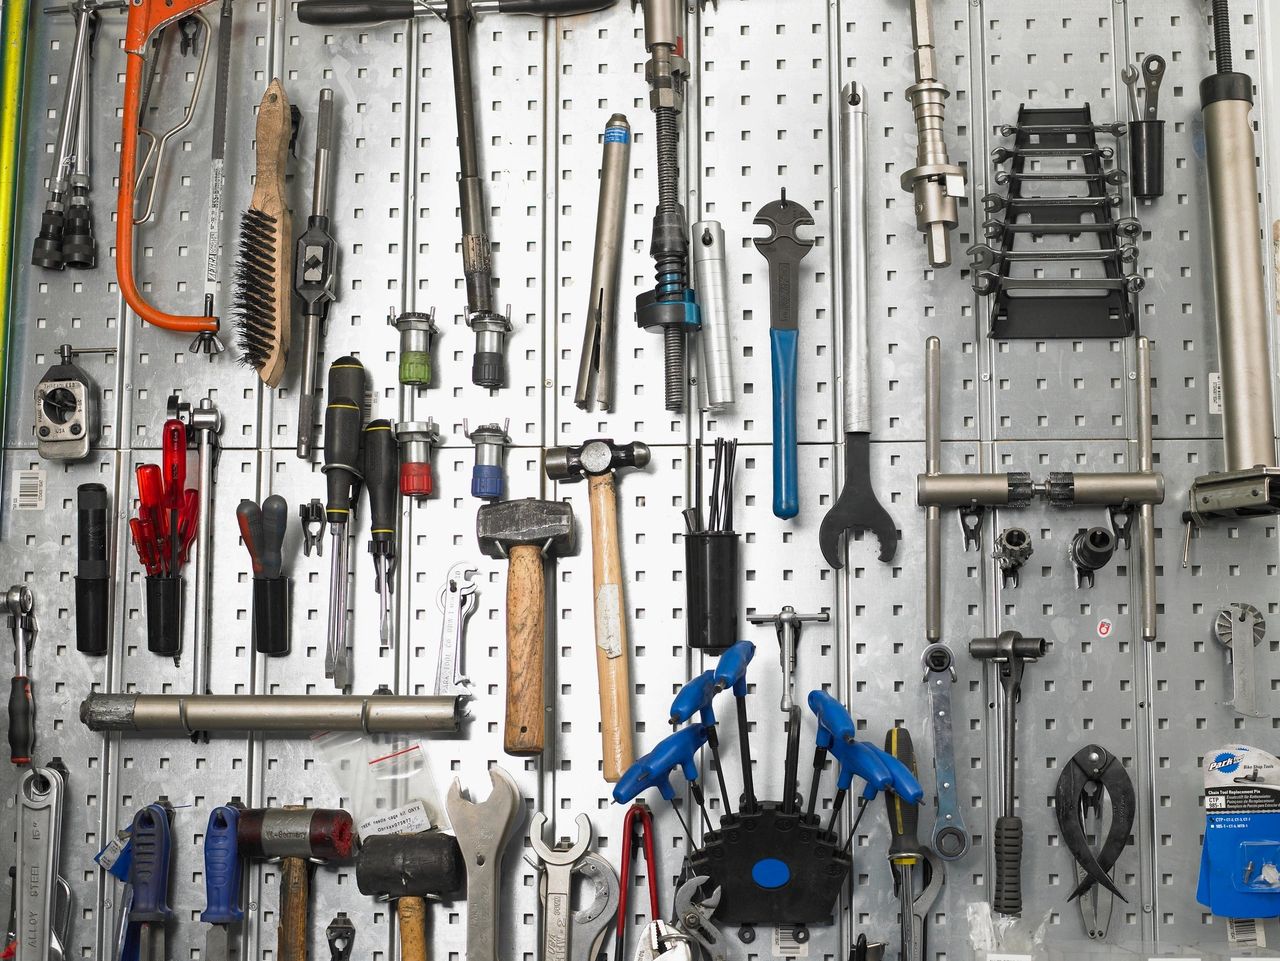 A wall of tools hand in the places ready for use.